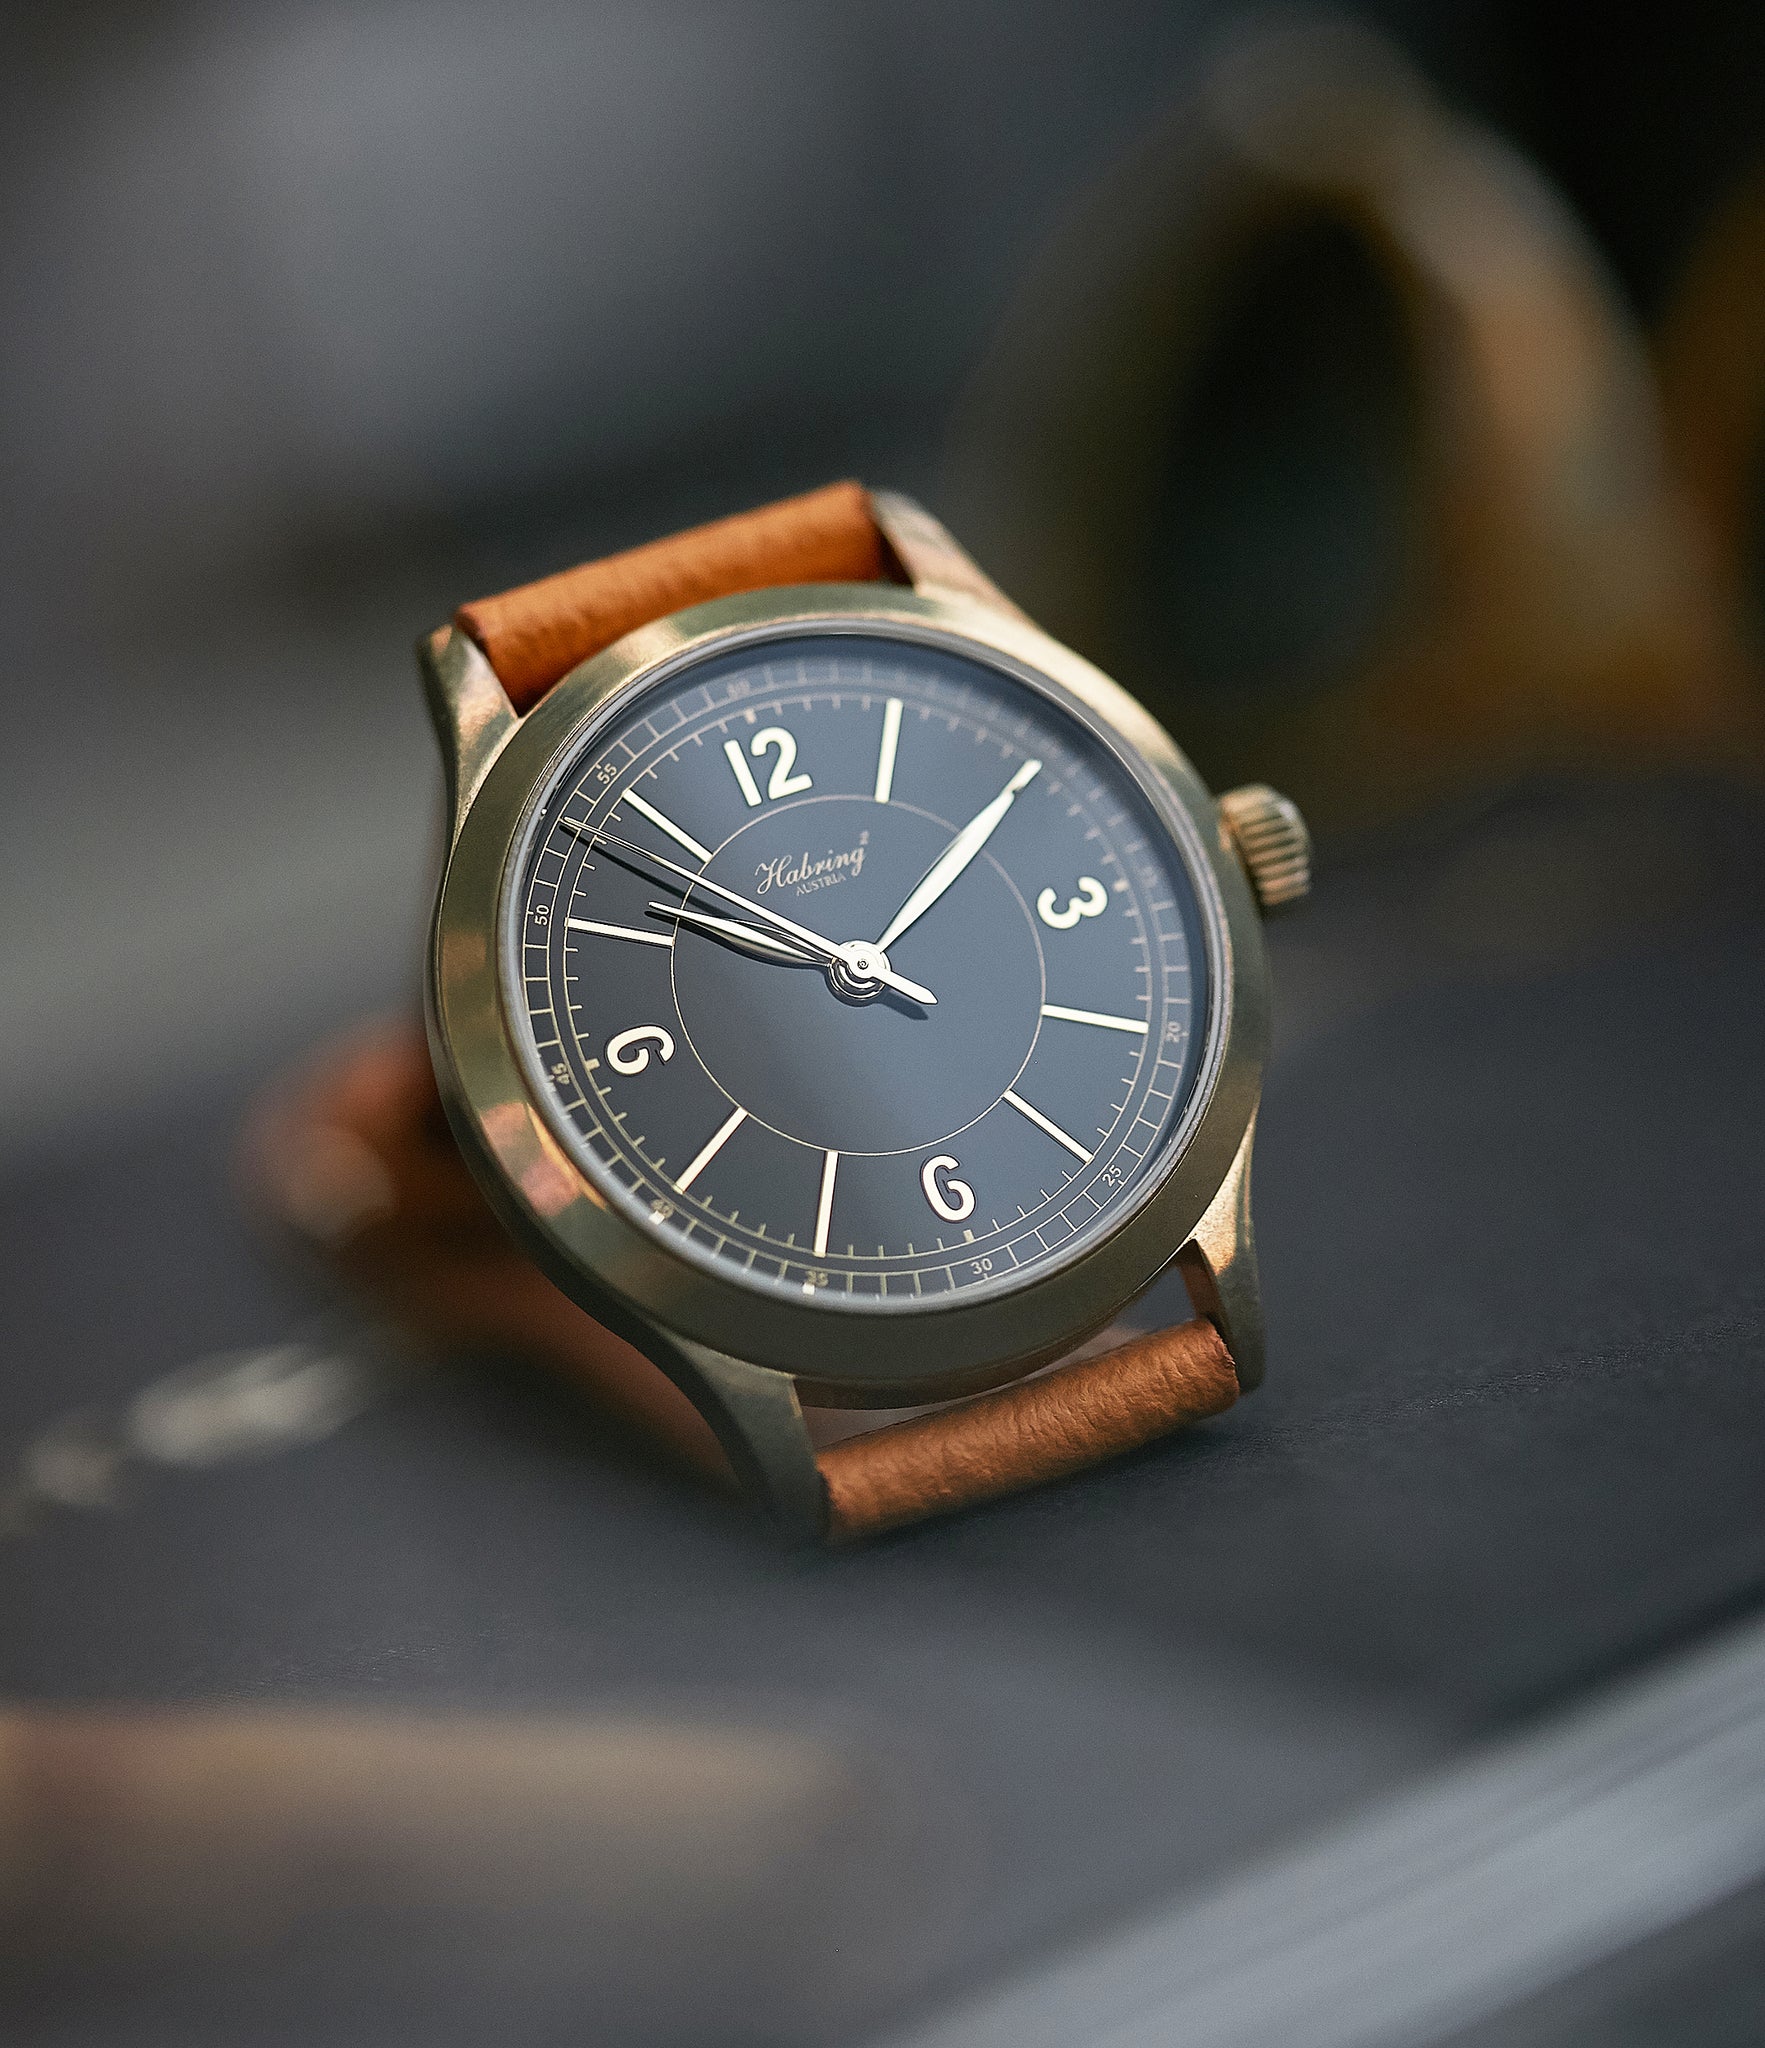 shop Habring2 Erwin LAB 01 Massena LAB Limited Edition bronze independent watchmaker dress watch for sale online at A Collected Man London UK rare watches